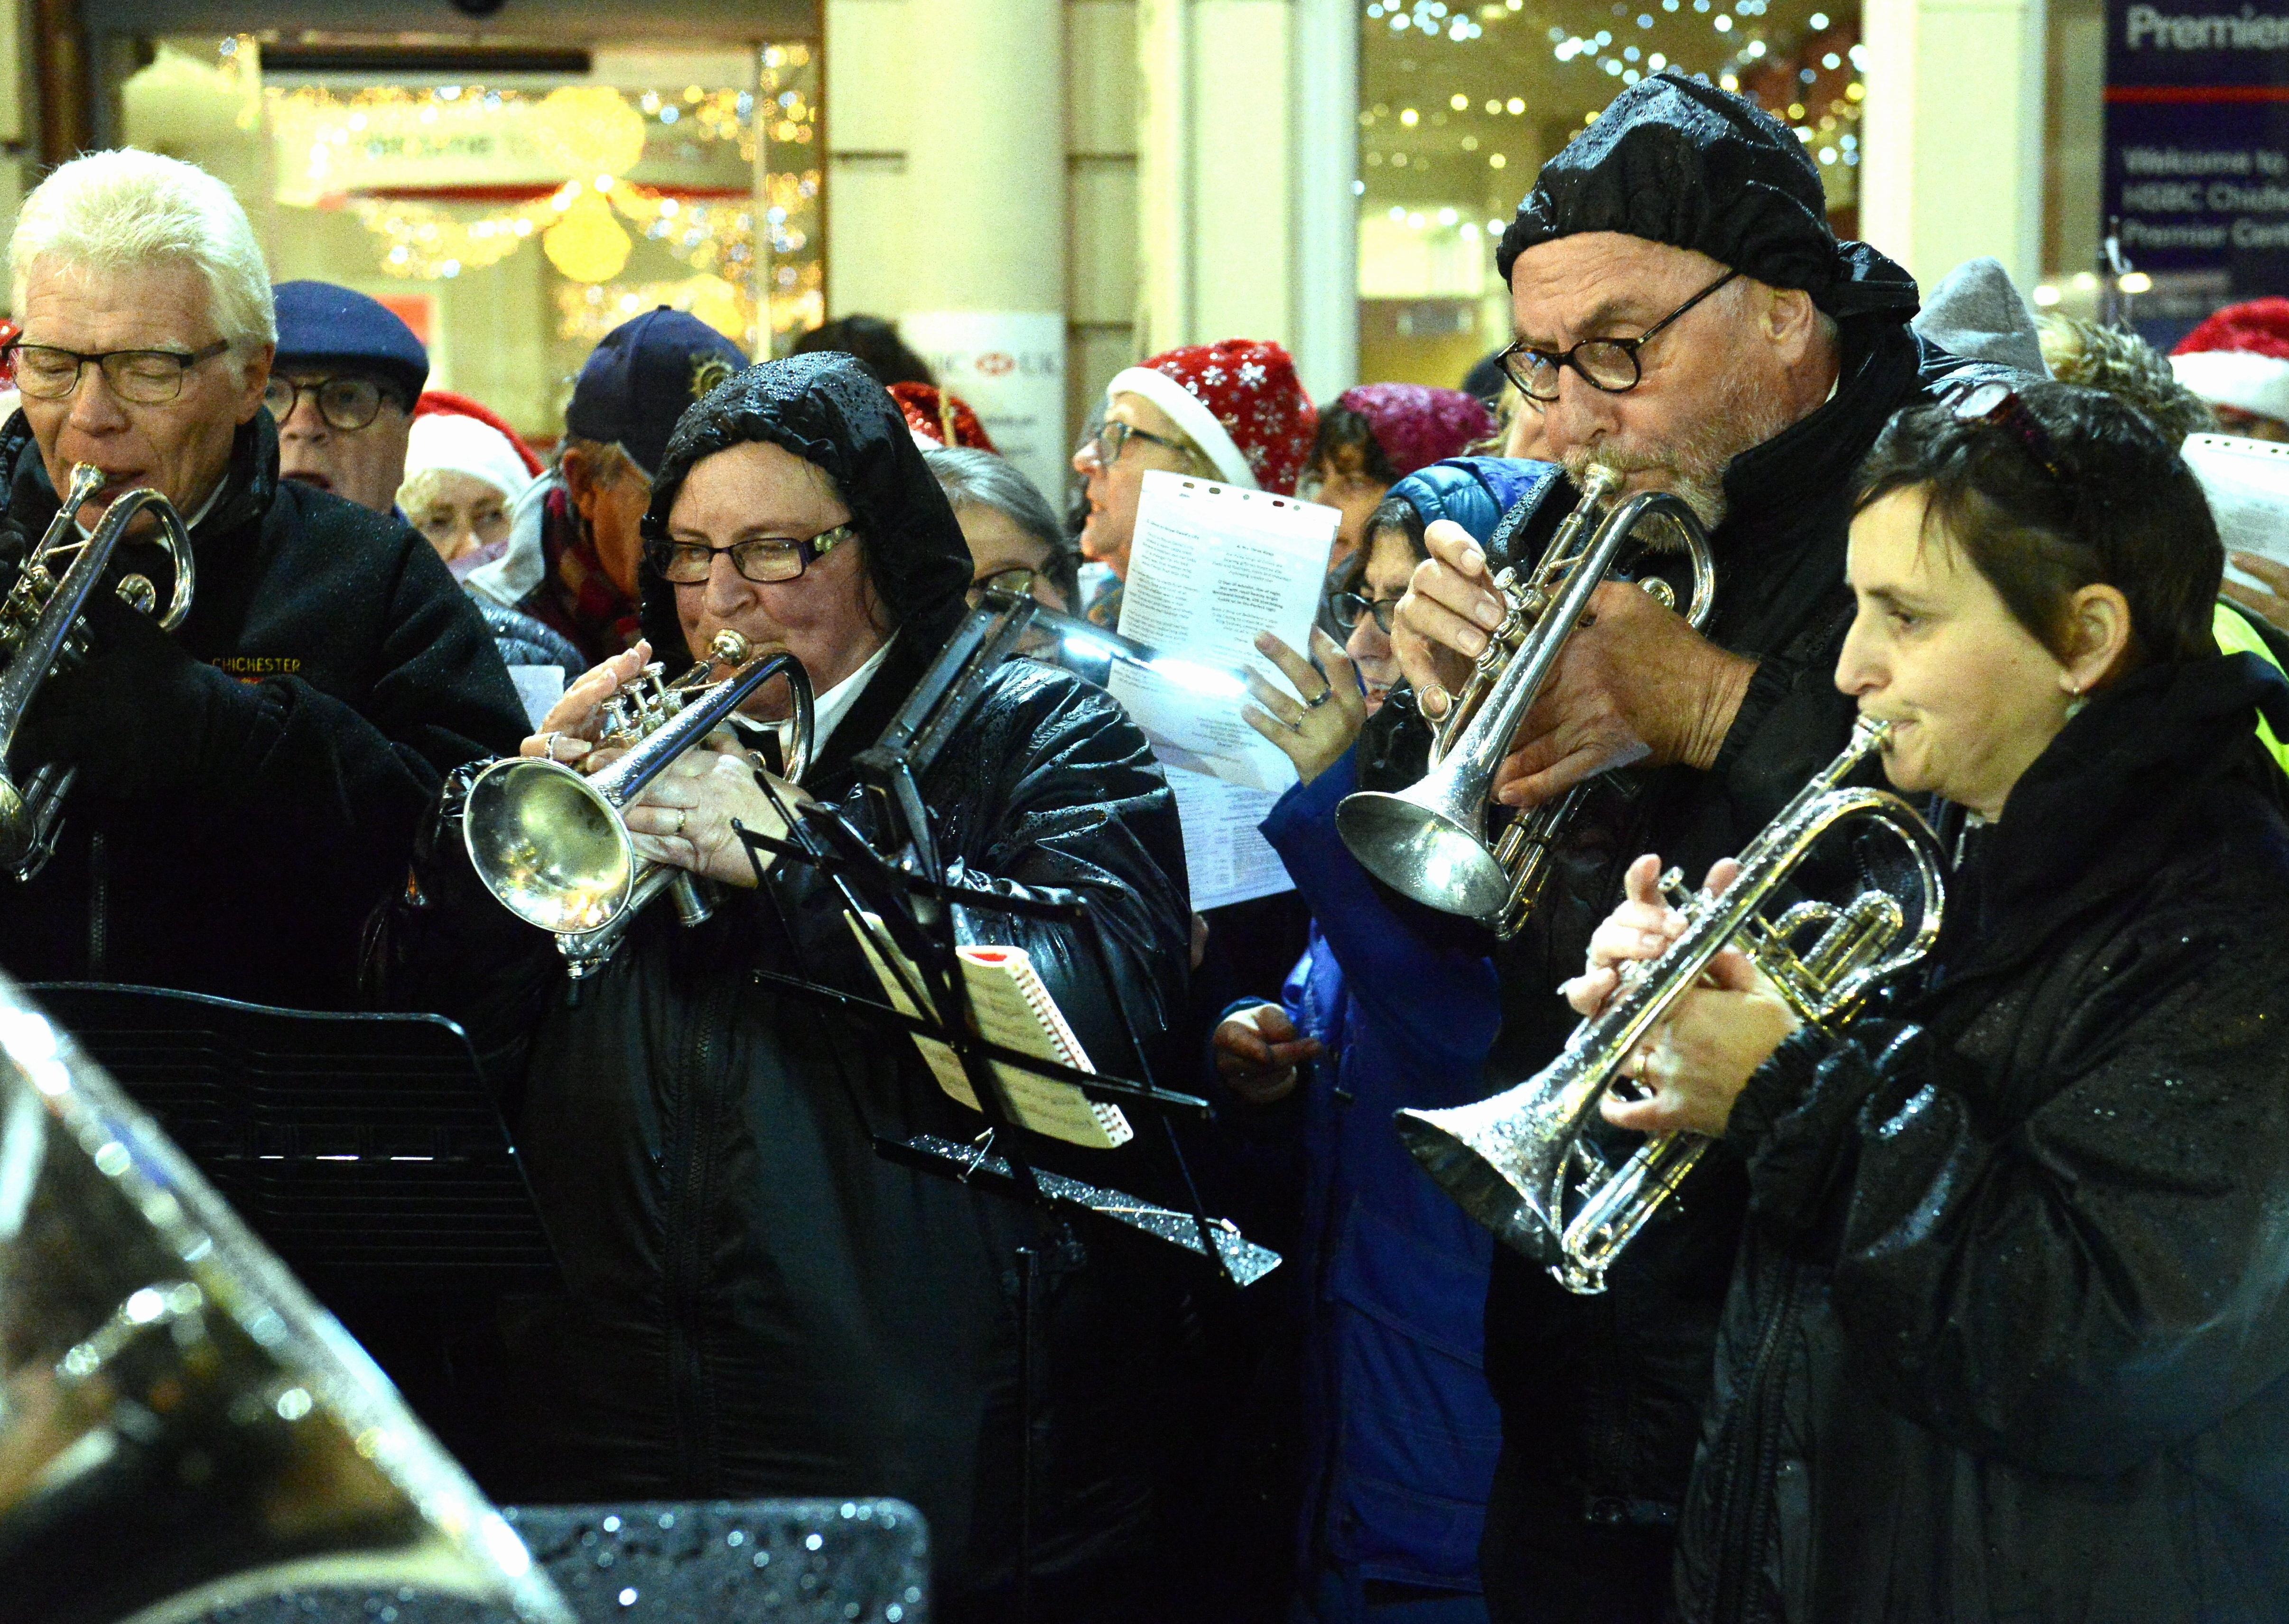 The Festival of Light celebration and Parade took place before Chichester's Christmas lights were switched on